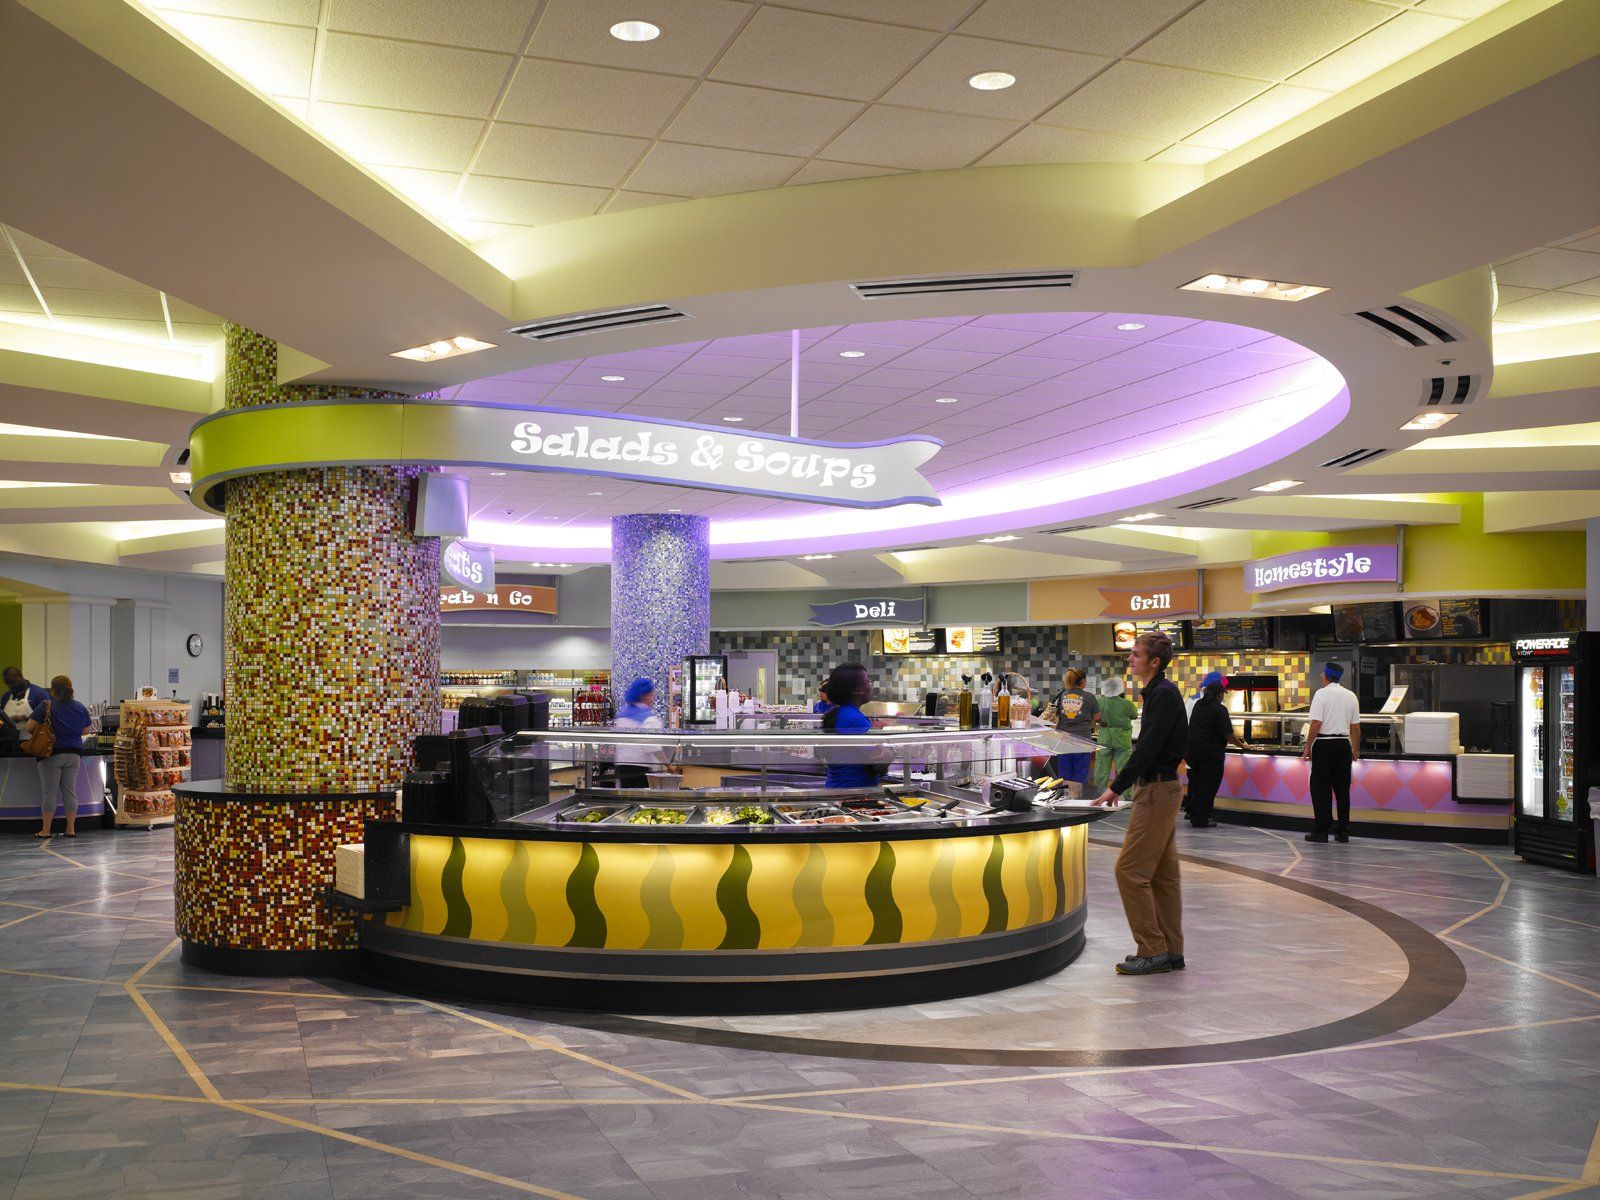 soup and salad area in food court